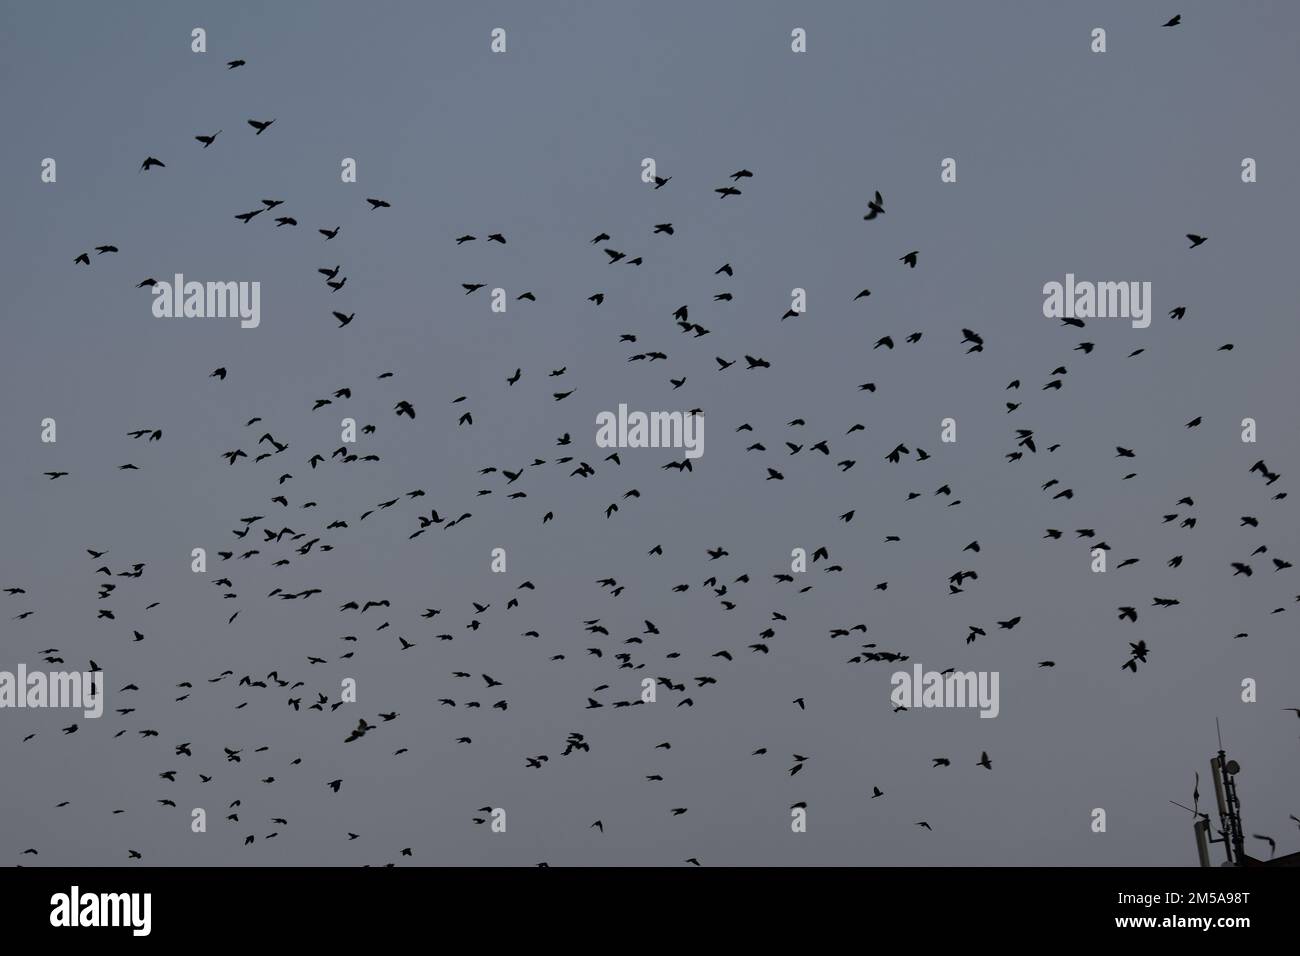 A lot of birds flying Stock Photo